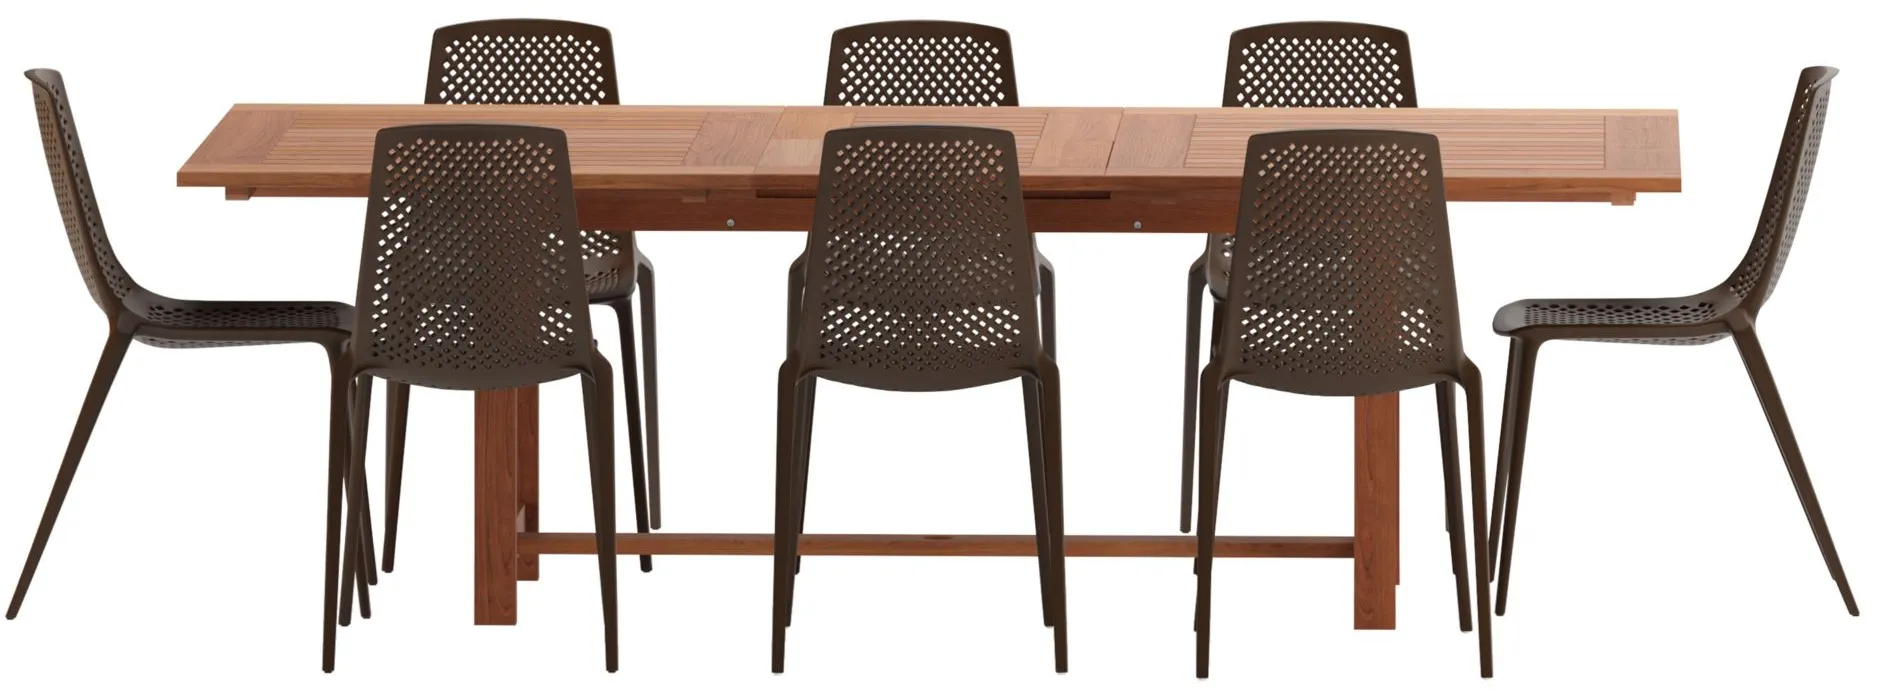 Amazonia 9-pc. Outdoor Rectangular Patio Dining Set in Washed Brown by International Home Miami